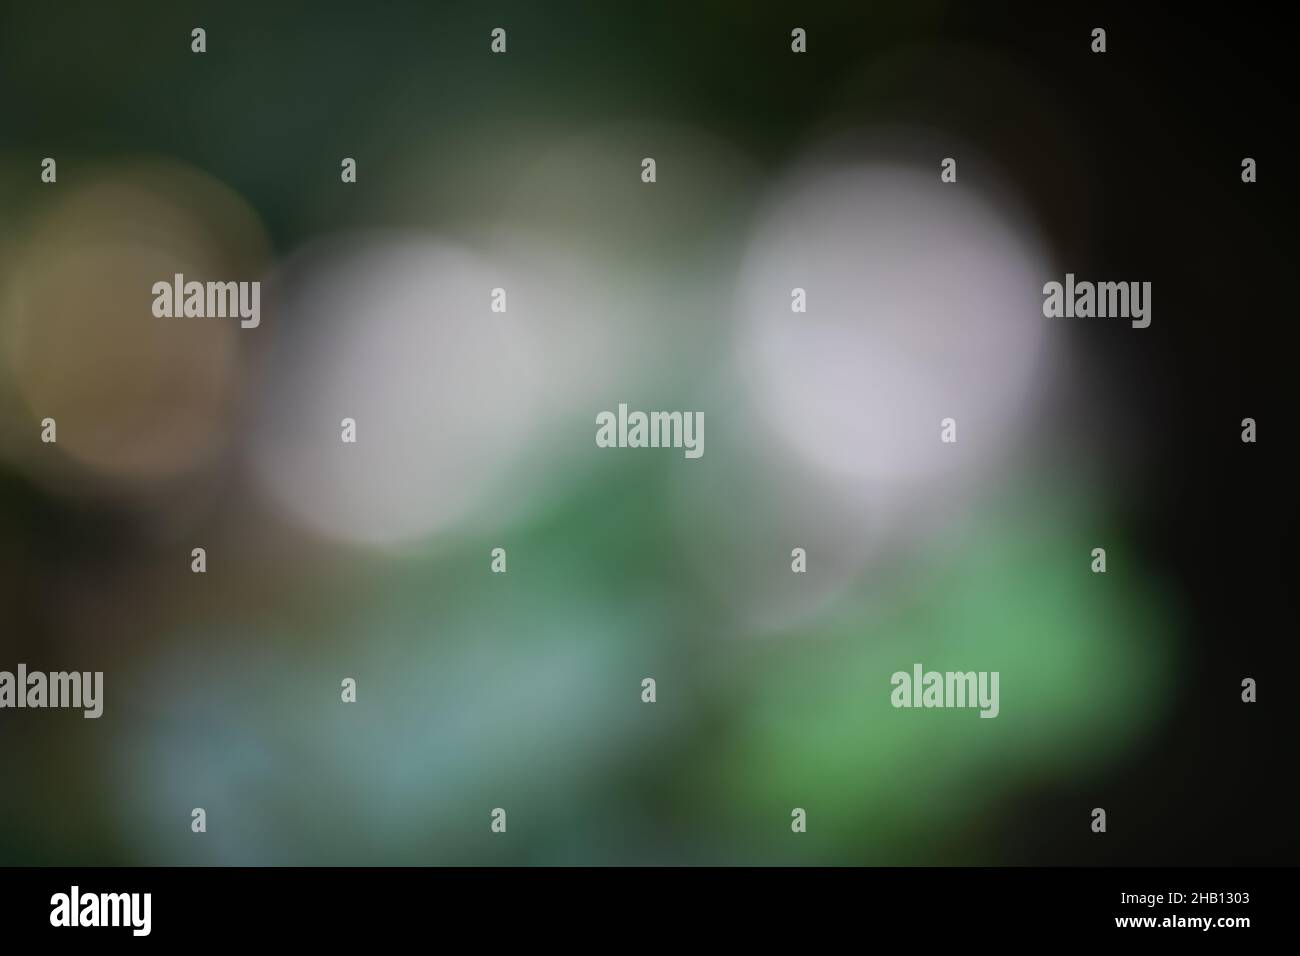 background bokeh blurred light reflections in green, white, black and yellow Stock Photo